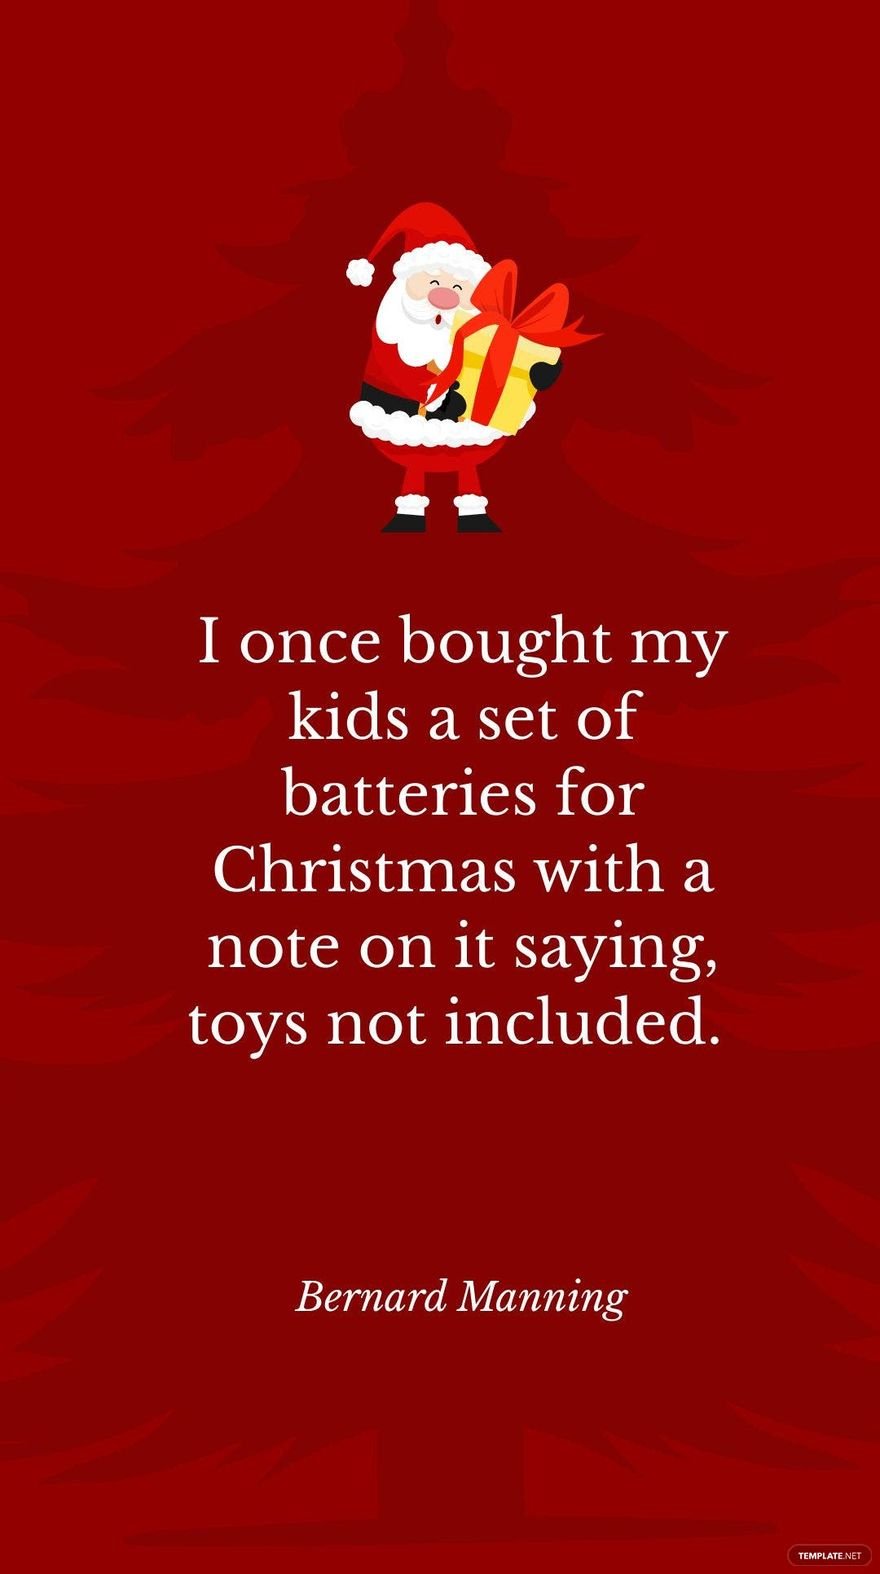 Bernard Manning - I once bought my kids a set of batteries for Christmas with a note on it saying, toys not included.